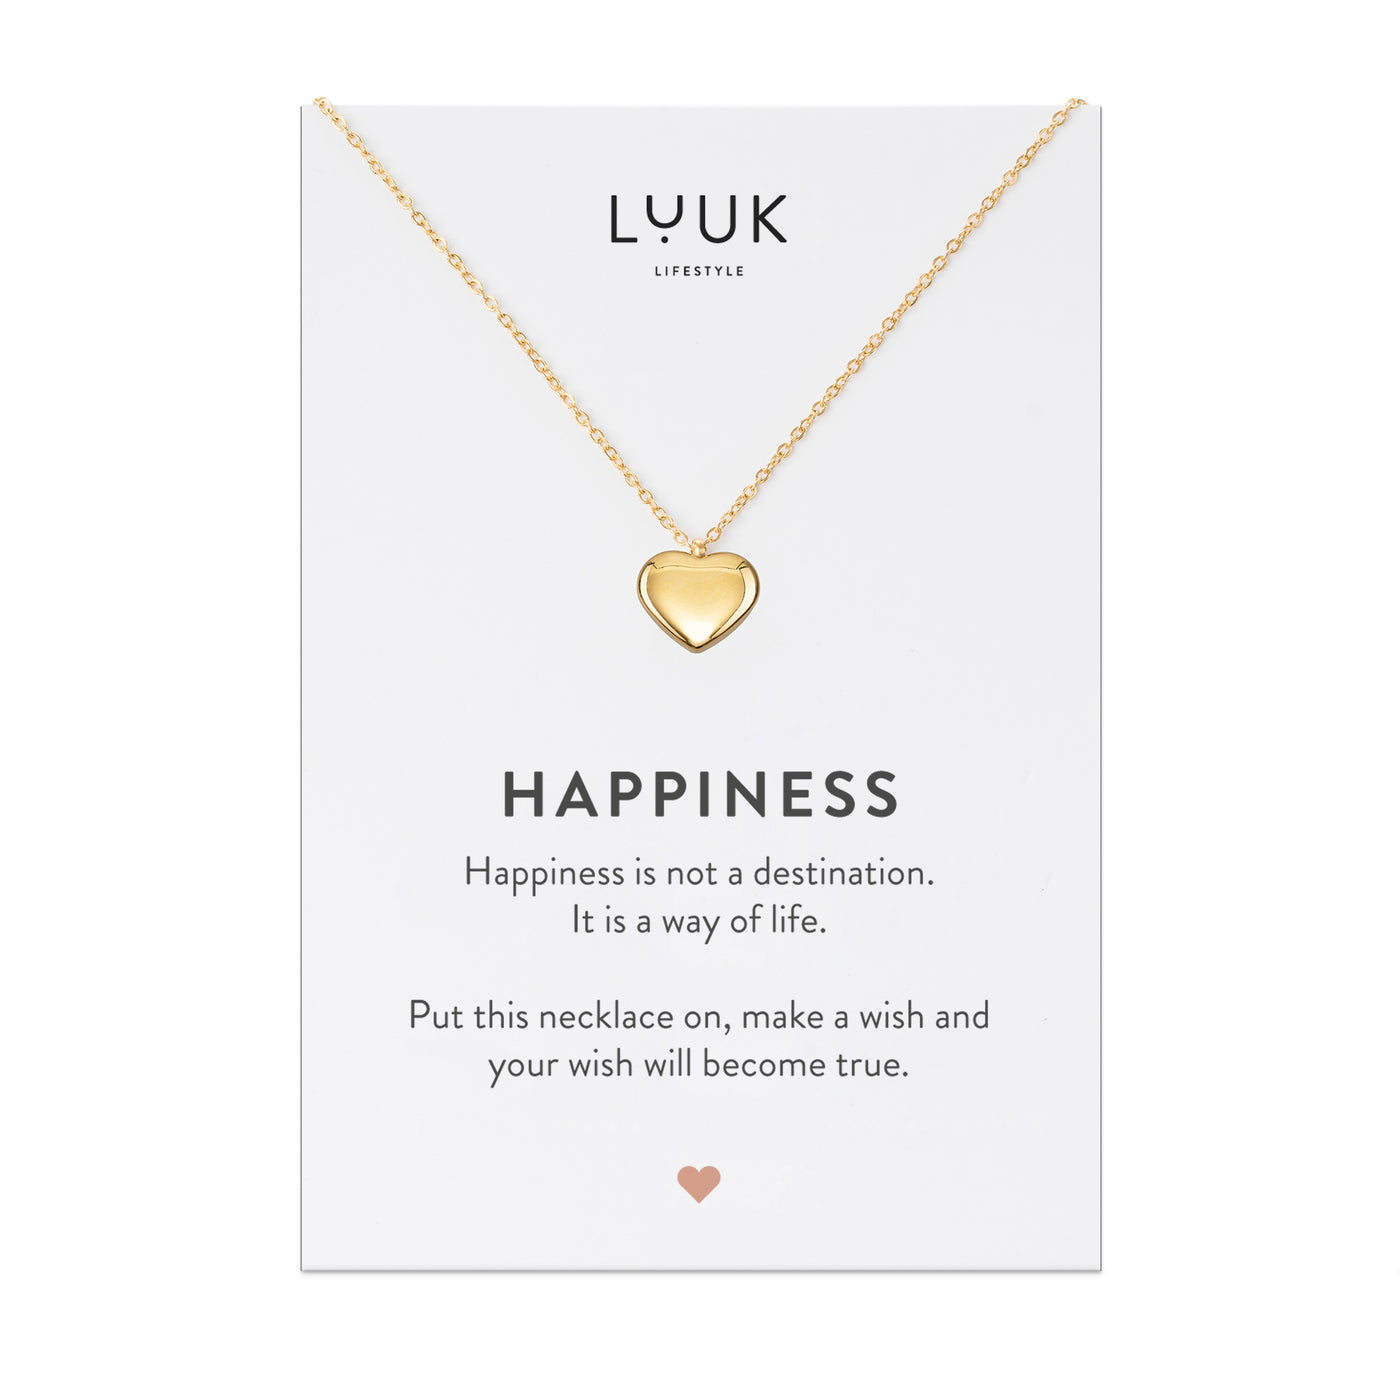 Necklace with heart pendant and happiness card